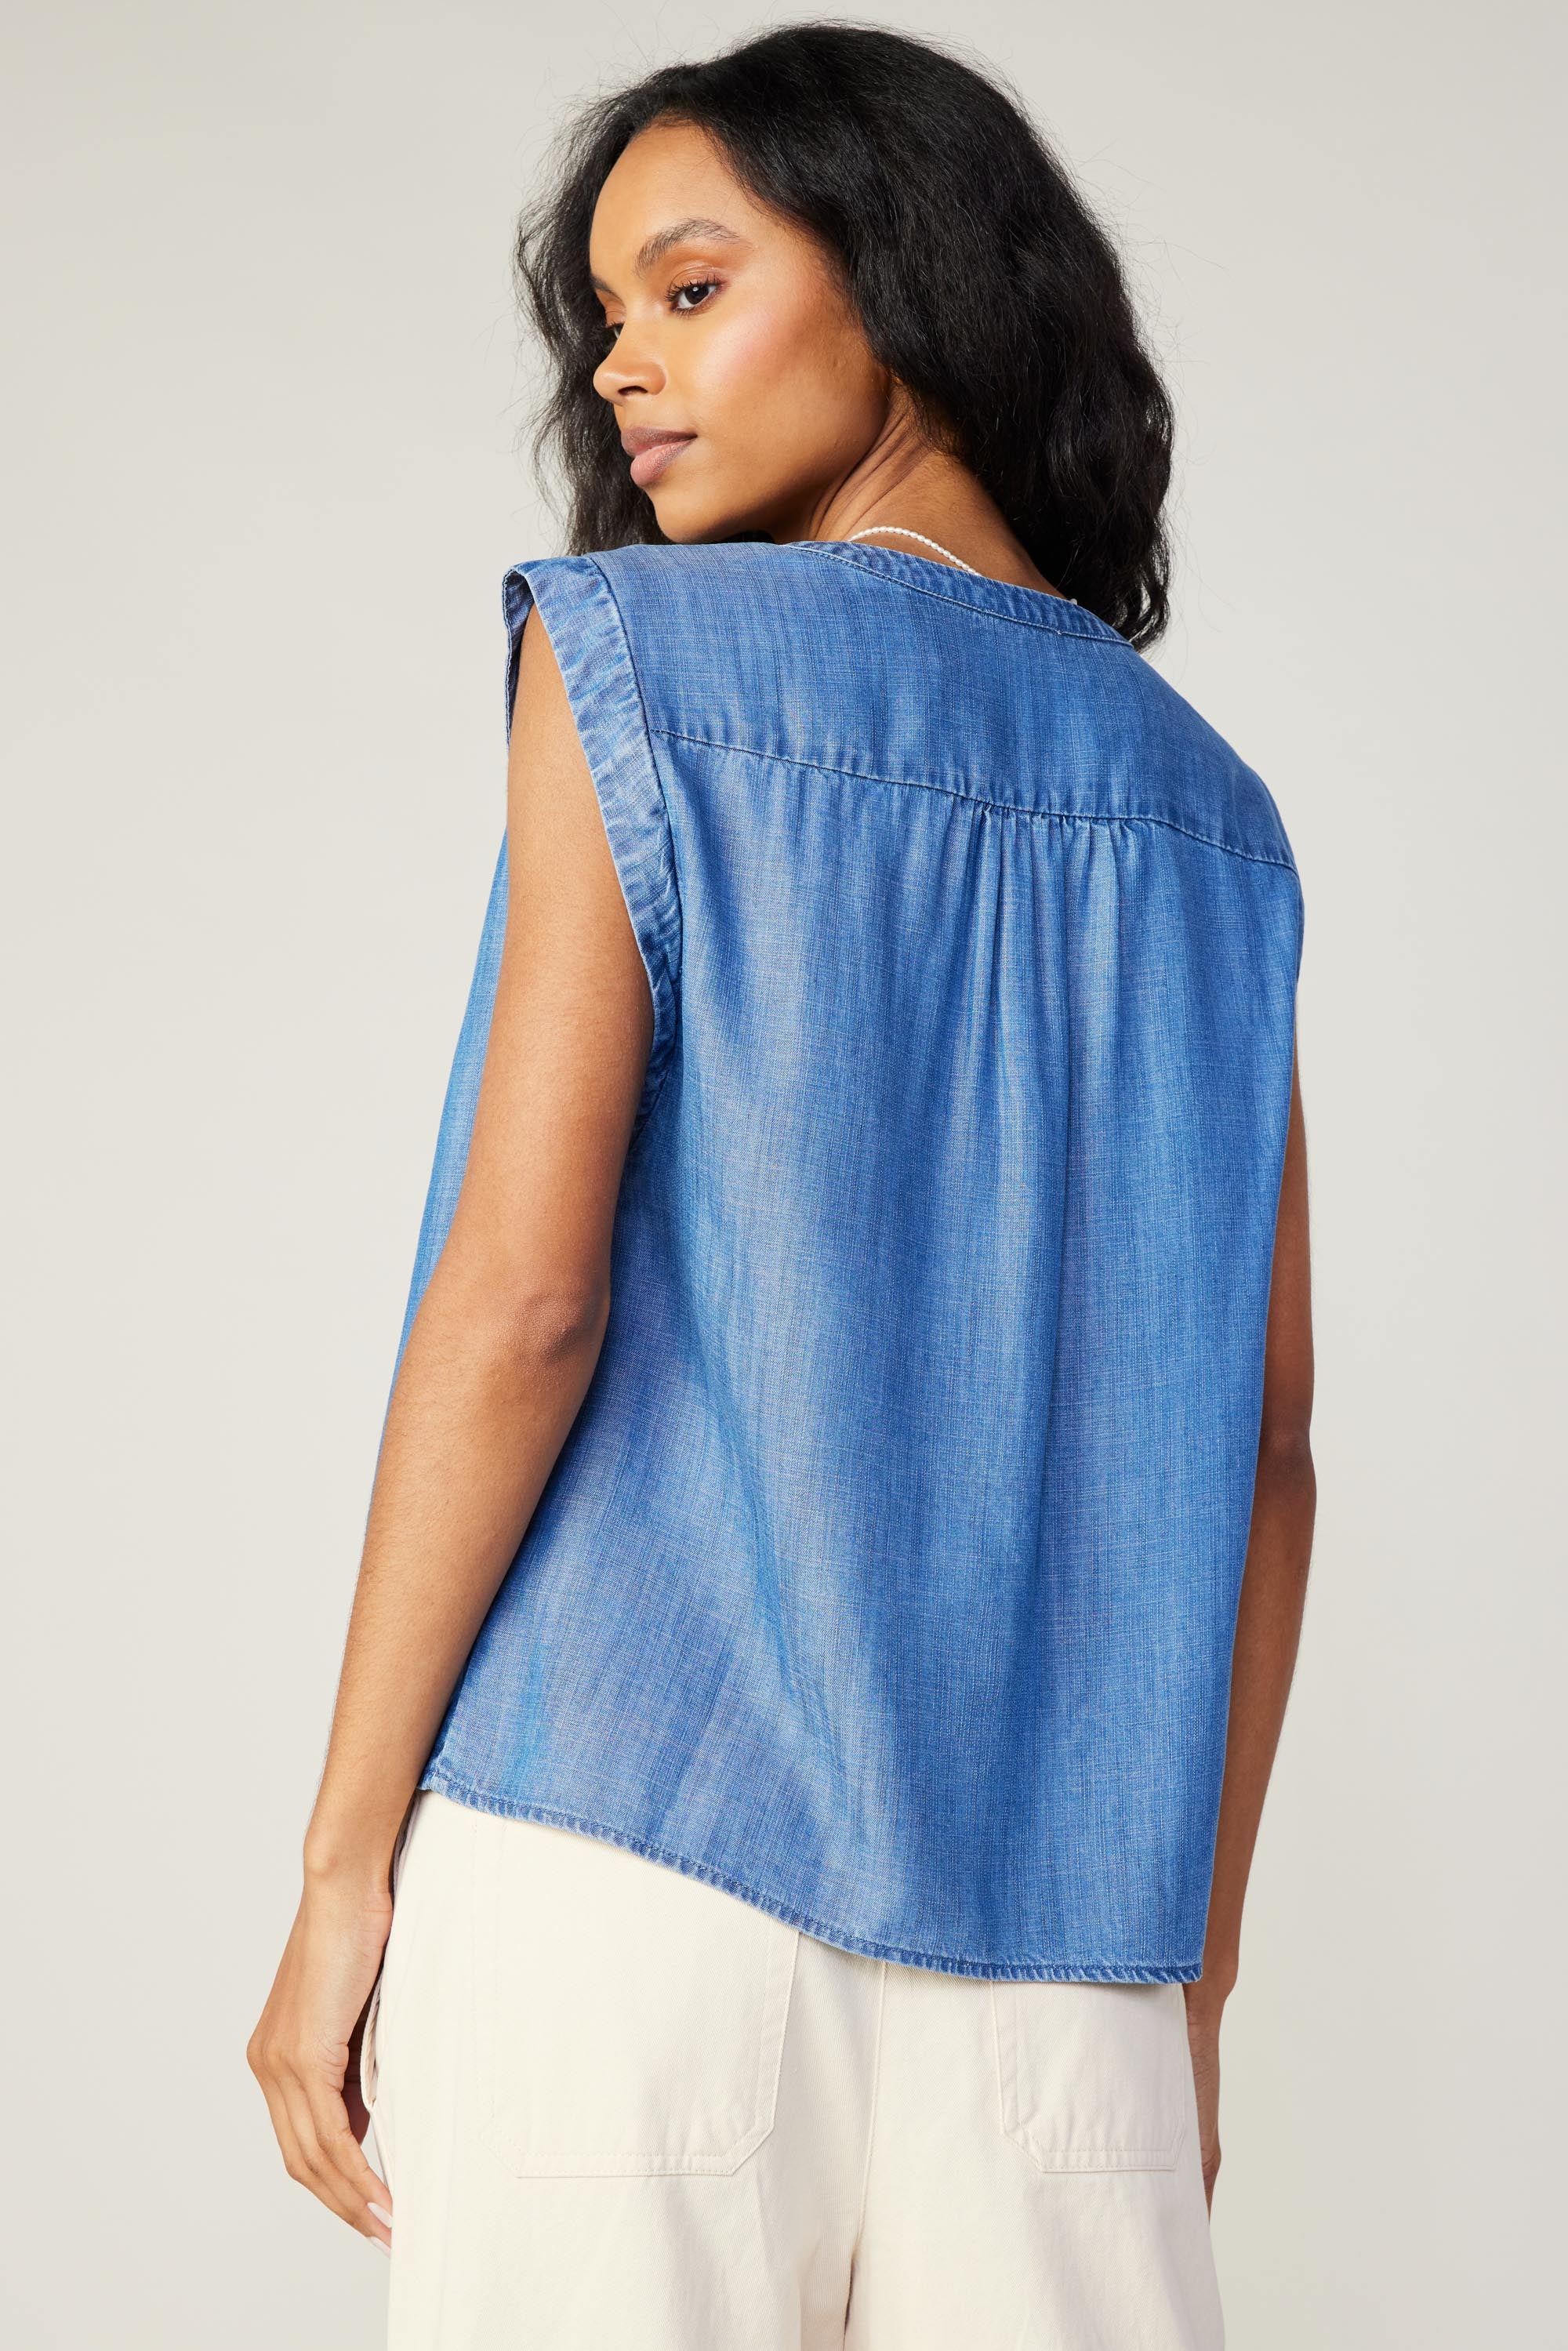 Chambray Tank Top – CURRENT AIR